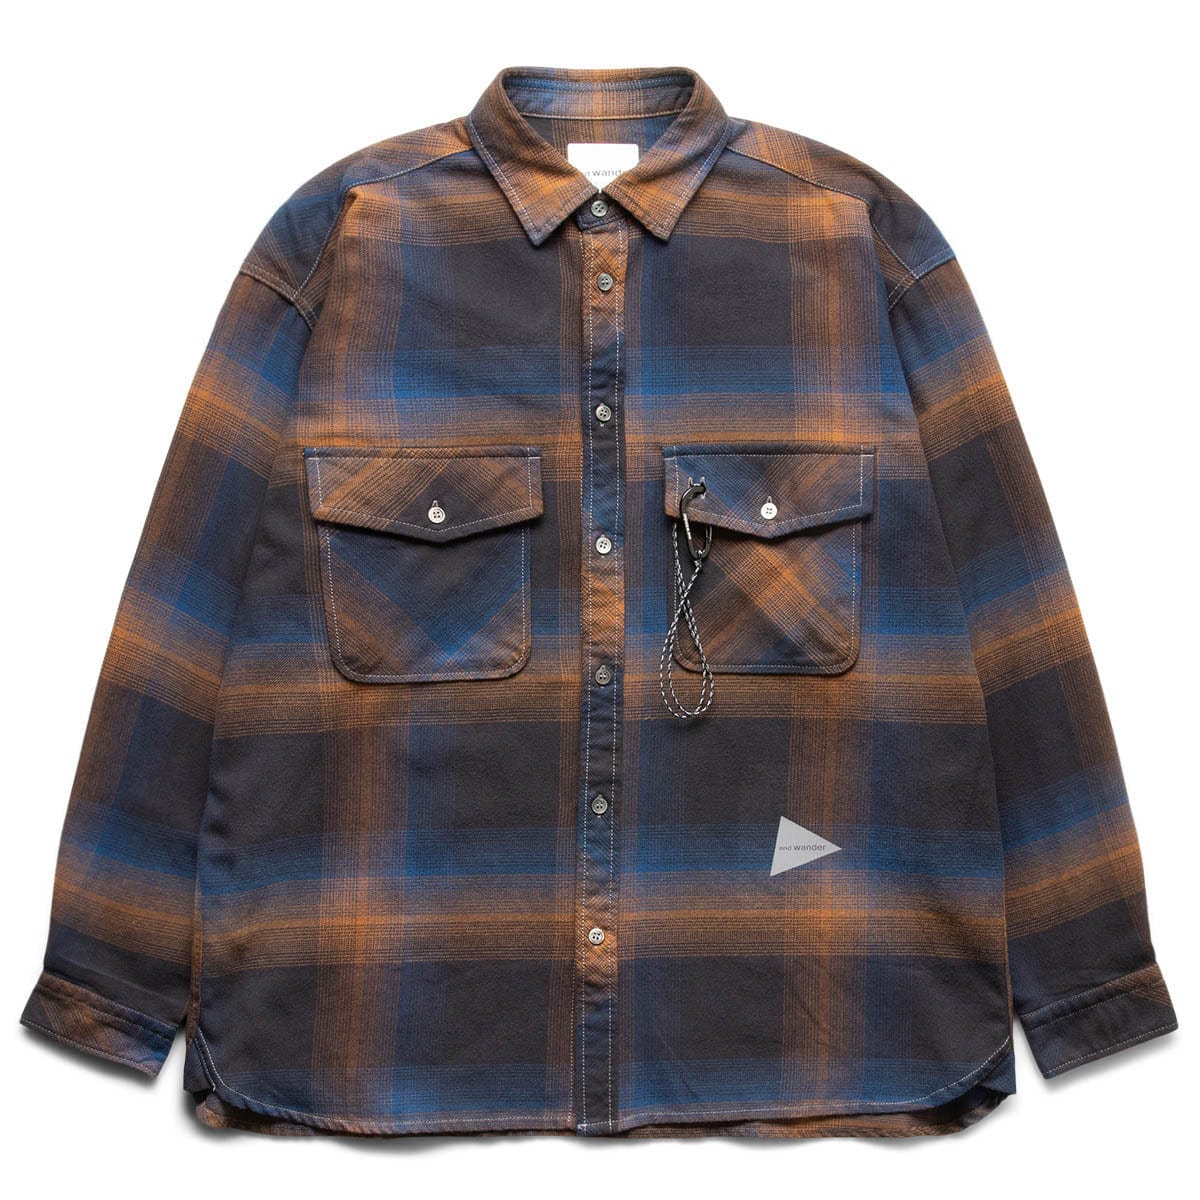 THERMONEL CHECK SHIRT